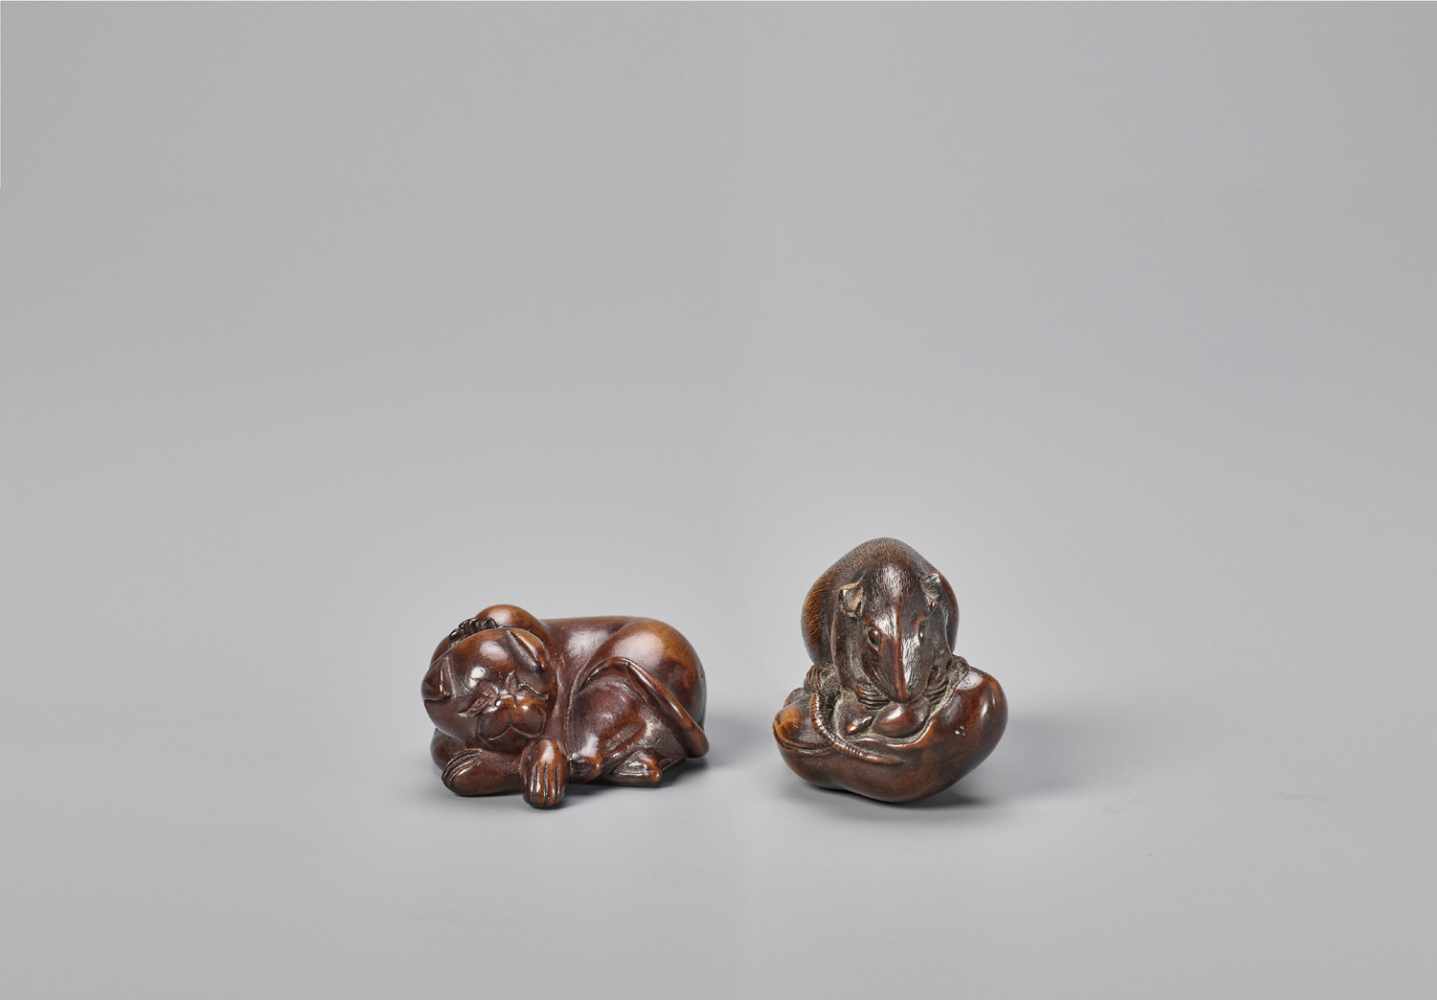 TWO WOOD NETSUKE OF A CAT AND A RAT